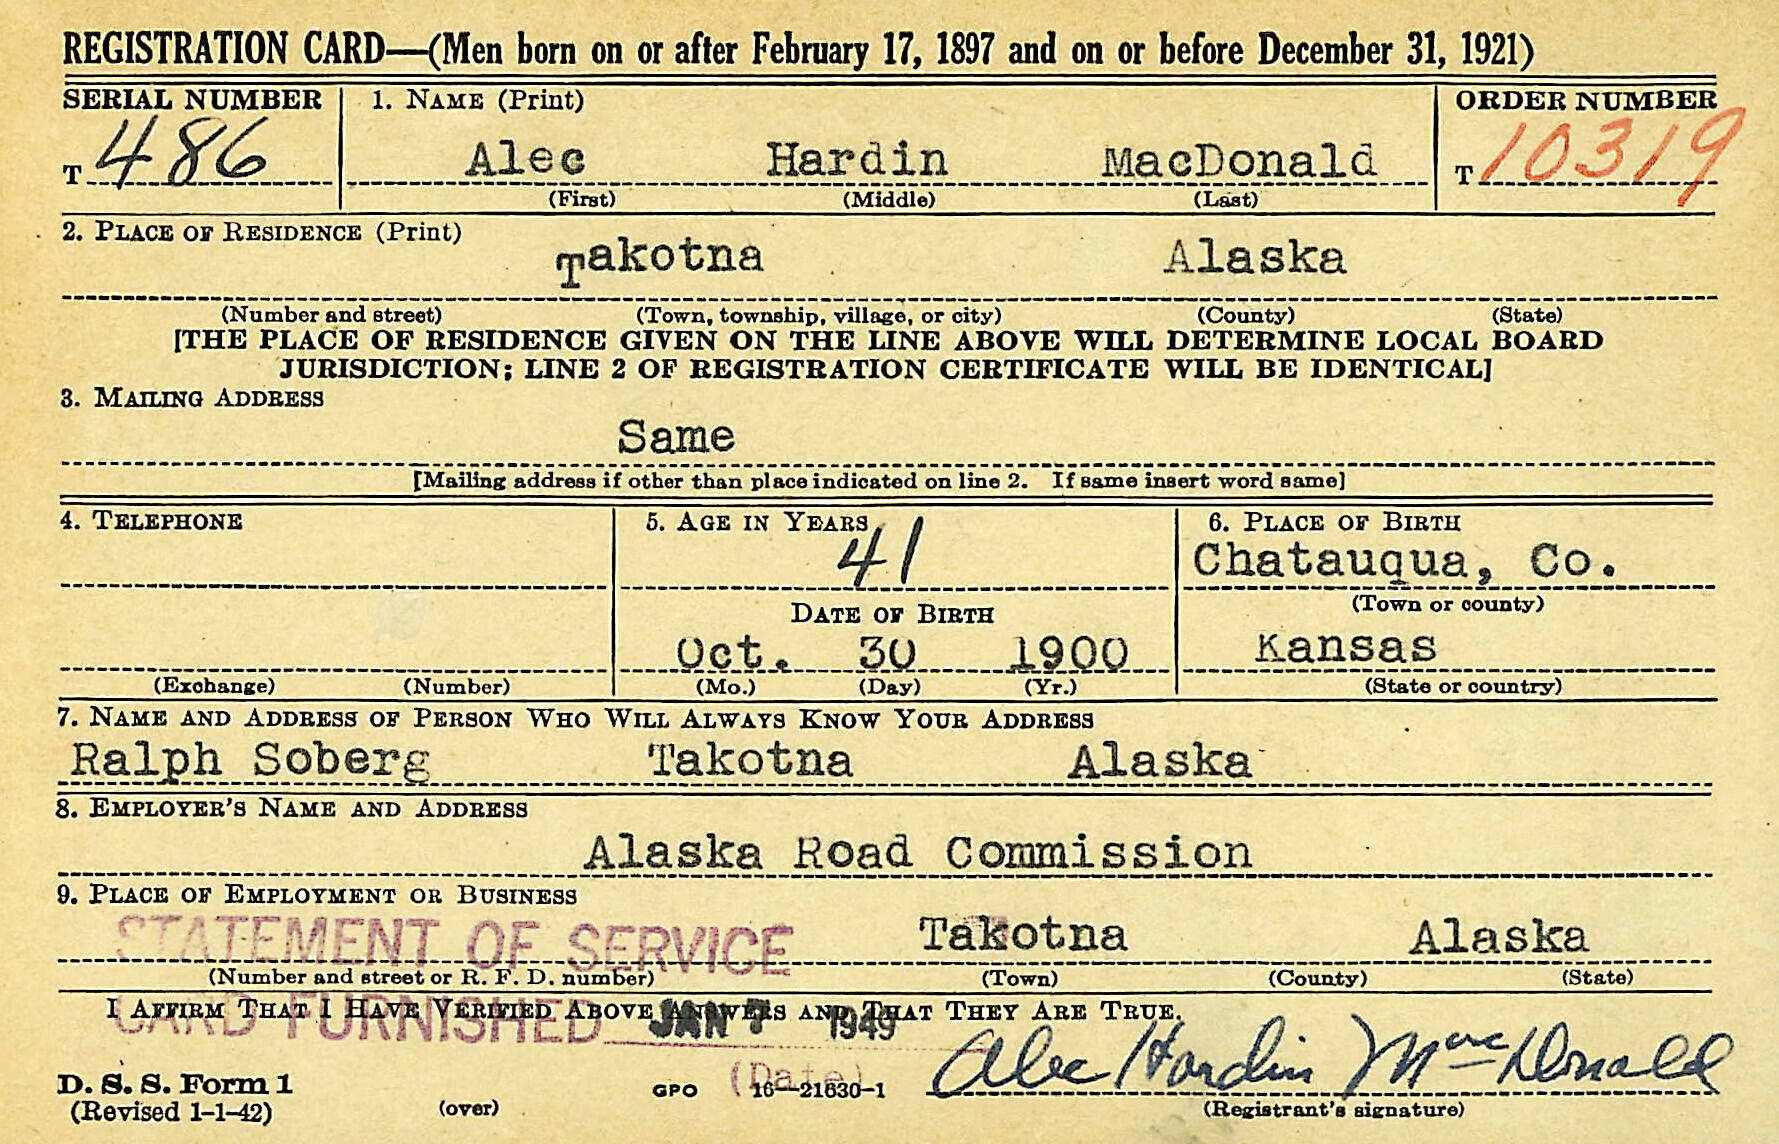 When Takotna resident Alec MacDonald registered in February 1942 for the military draft, he falsely claimed to have been born in 1900 in Chautauqua County, Kansas.